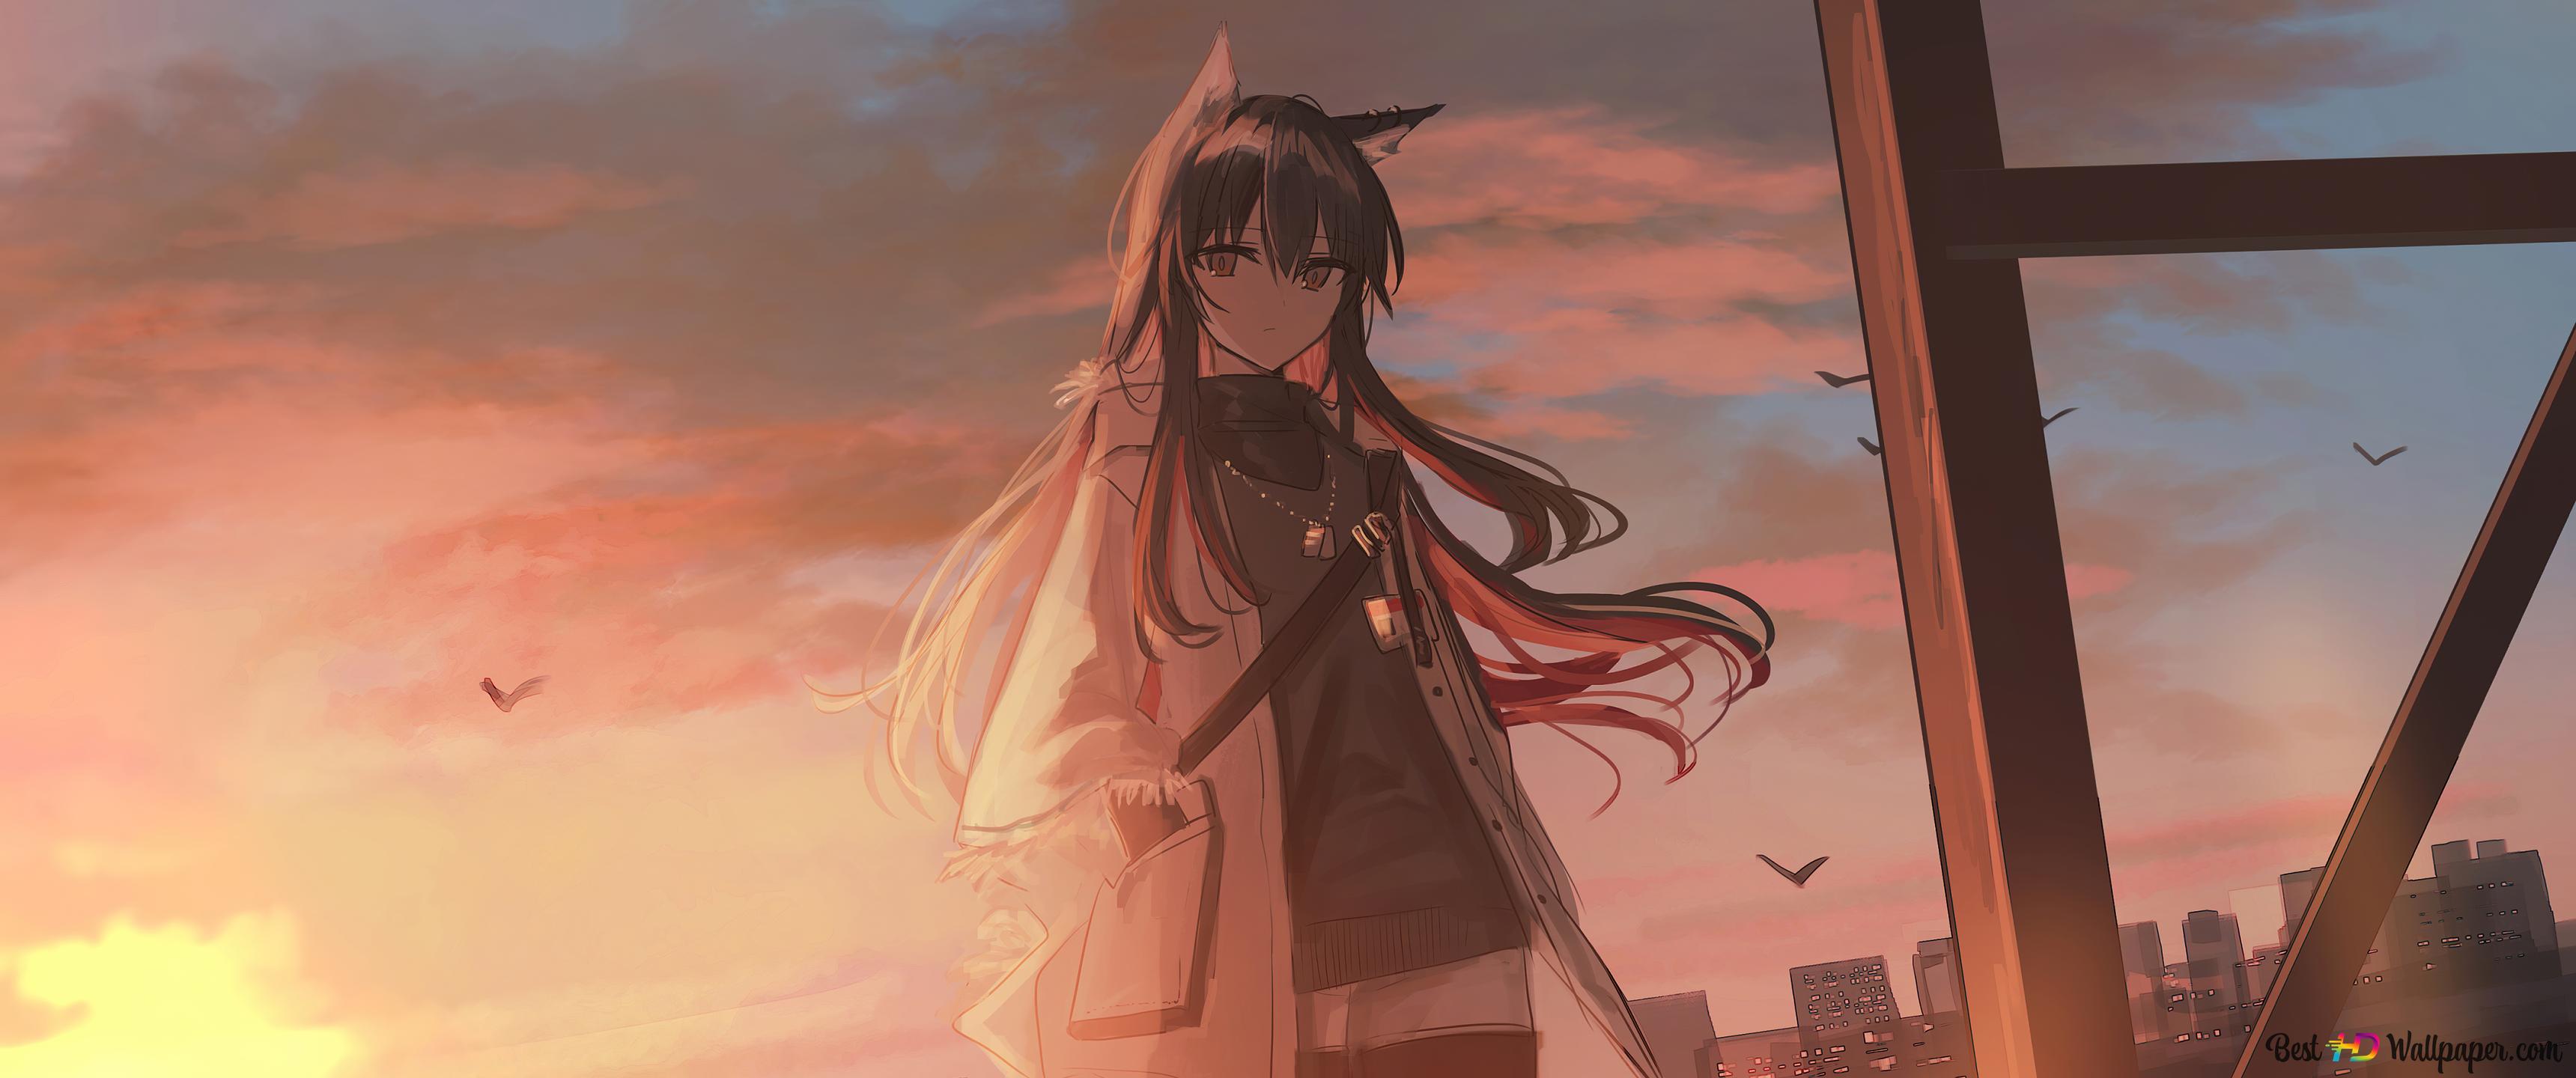 Cute anime girl alone in frount of sunset 4K wallpaper download